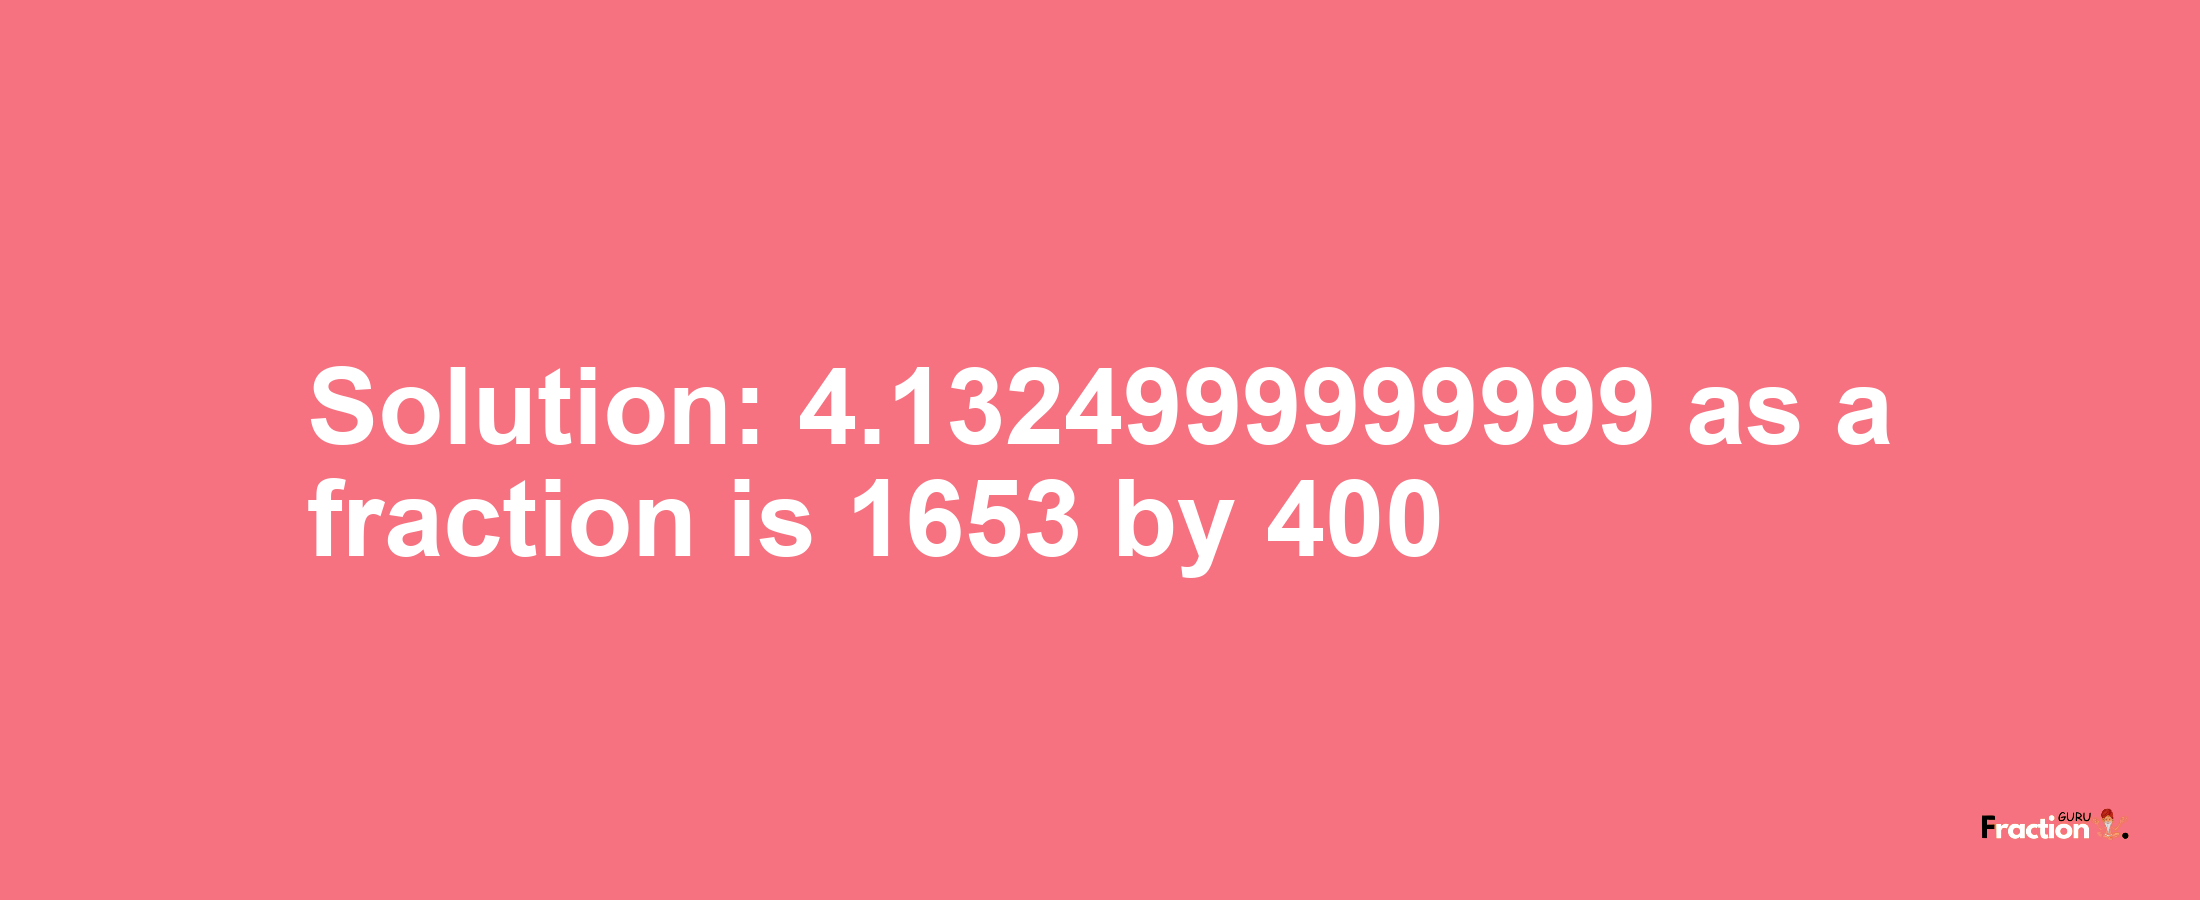 Solution:4.1324999999999 as a fraction is 1653/400